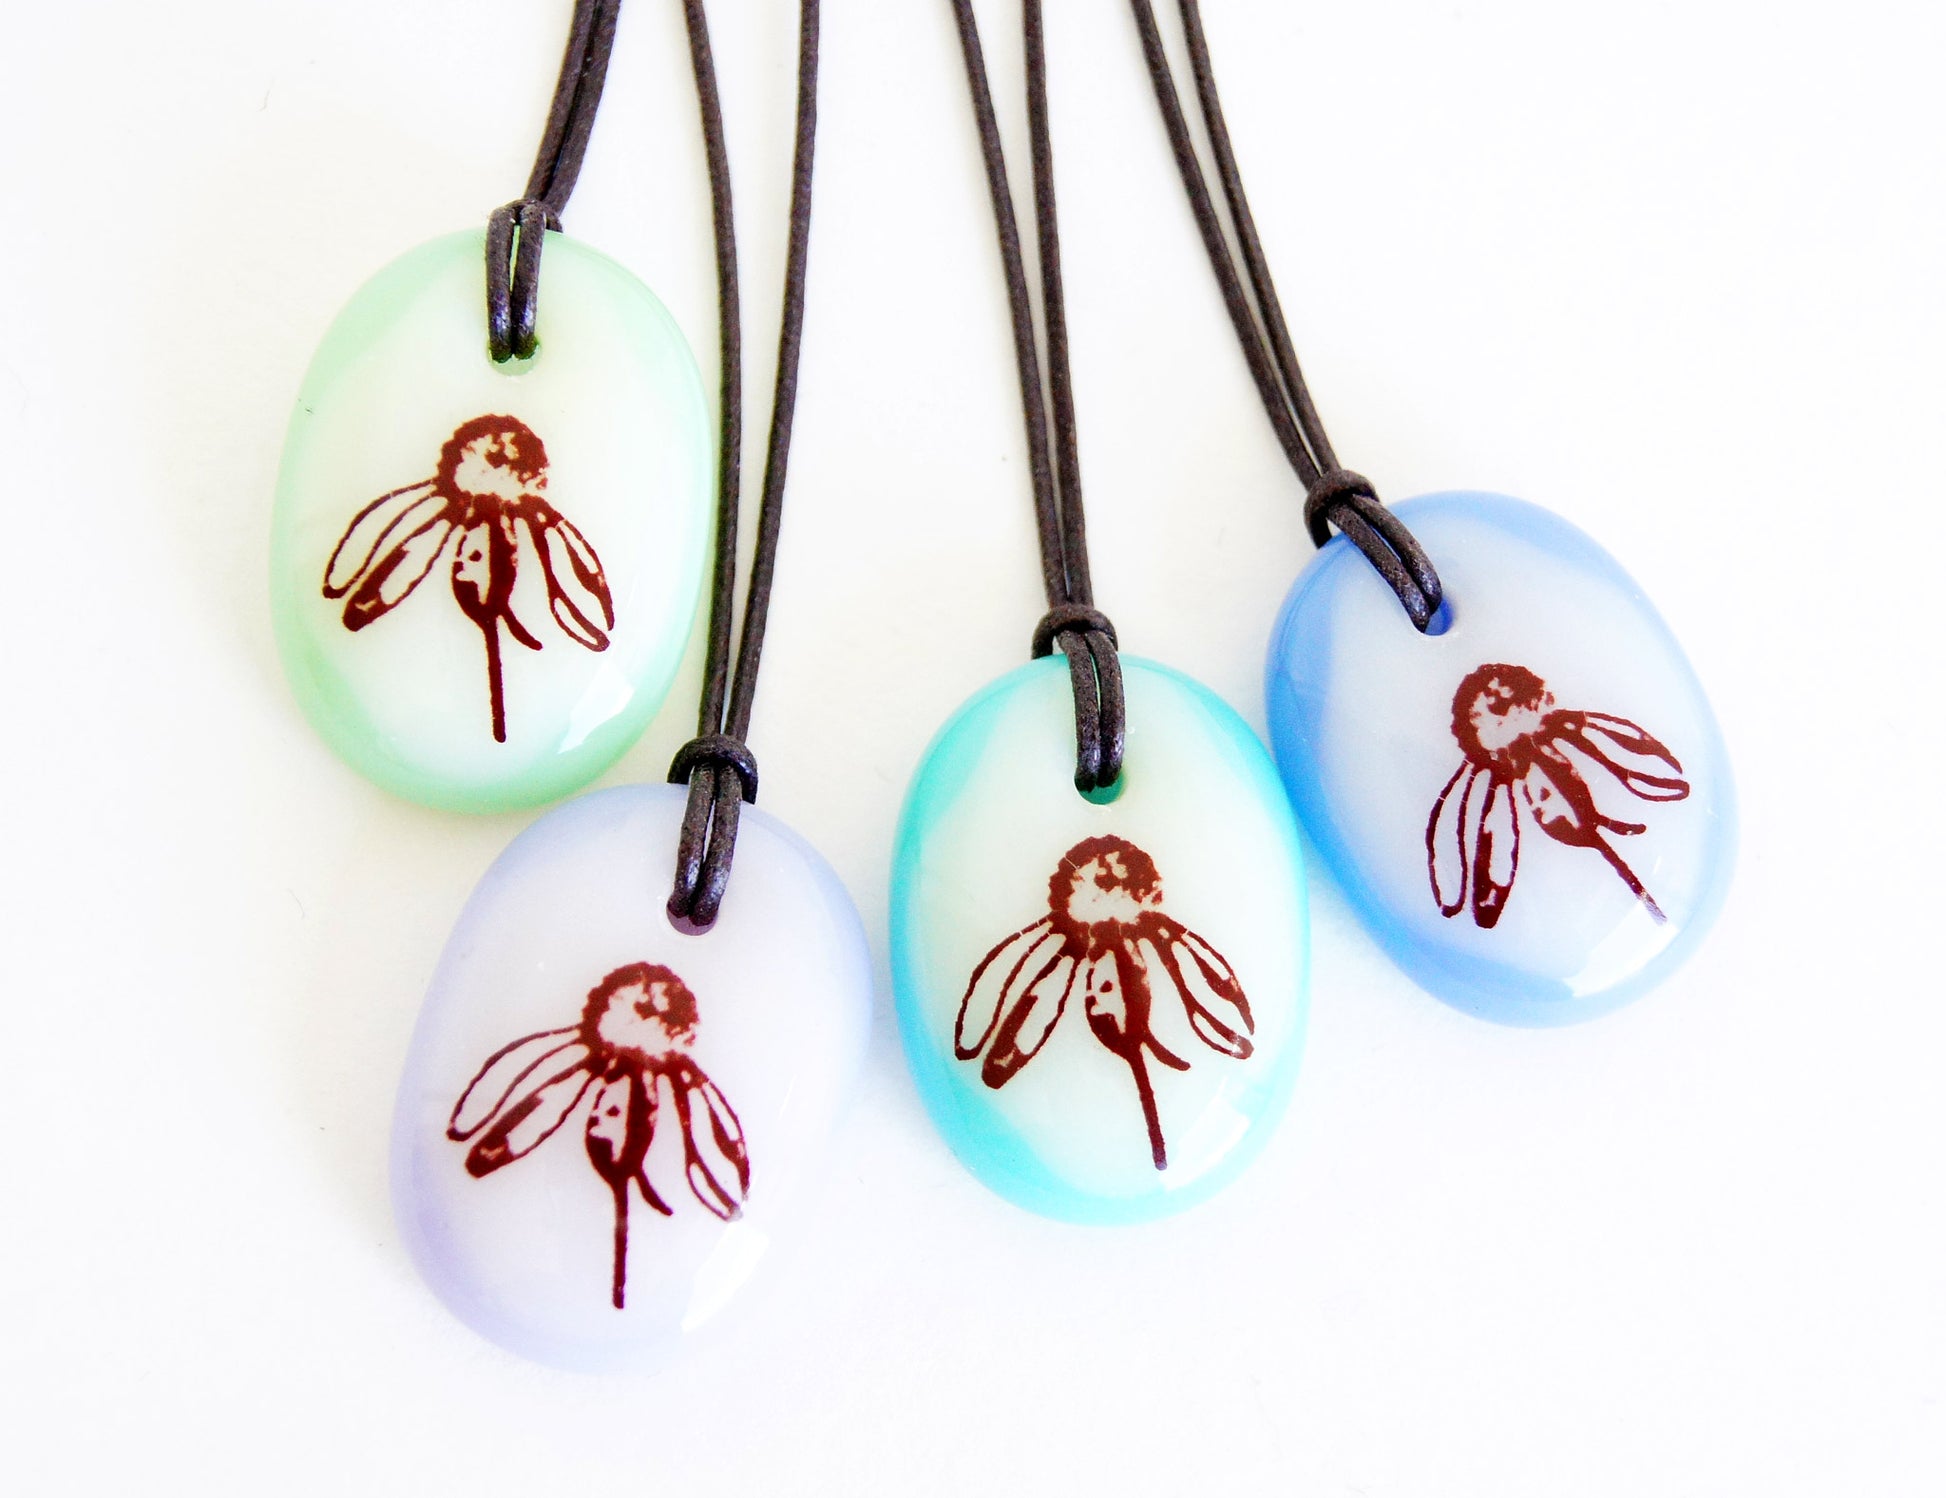 Your choice of handmade wildflower necklace on cotton cord. 